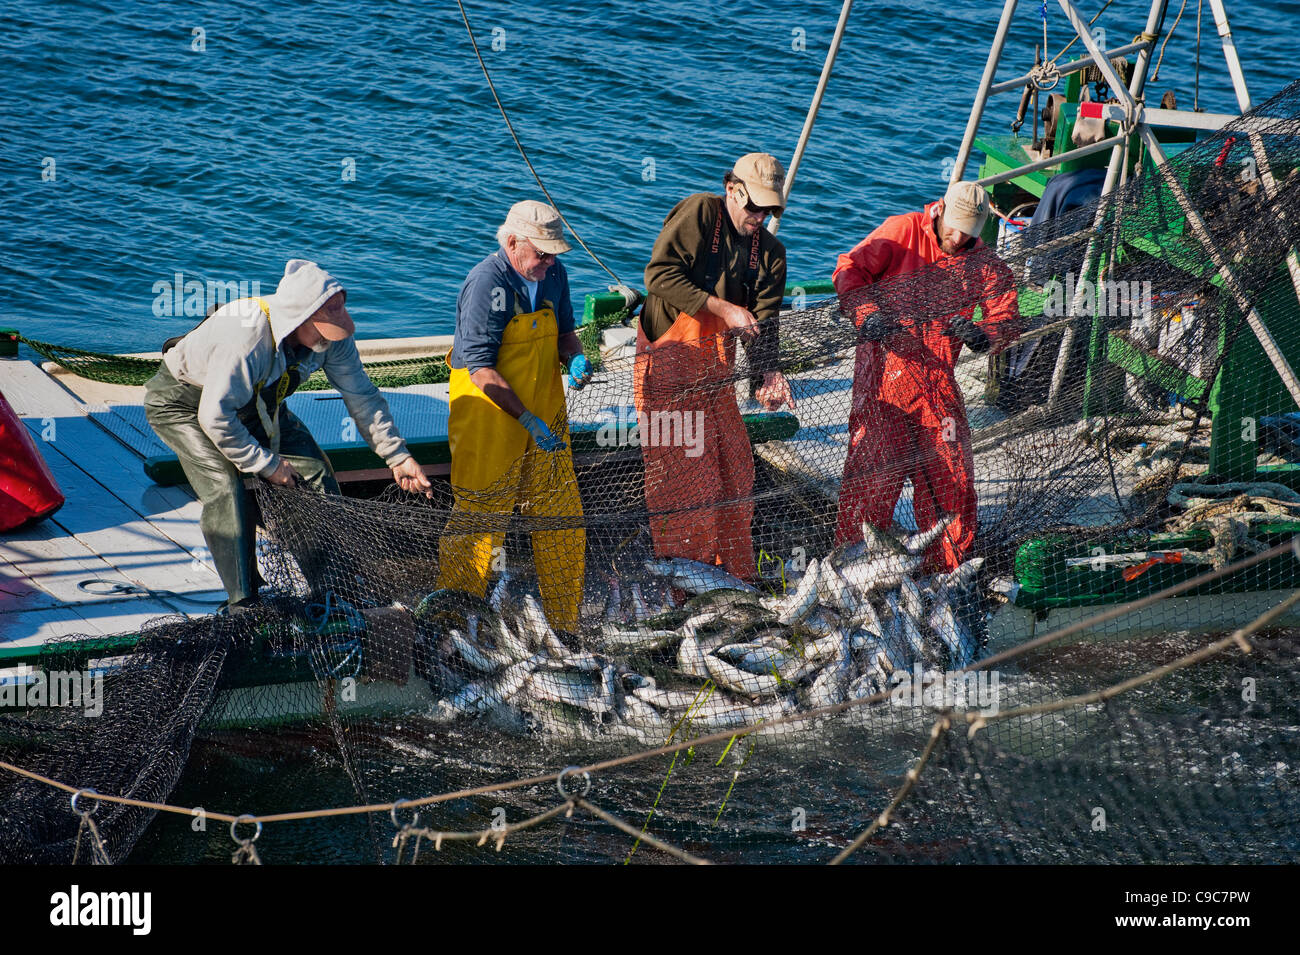 Fishermen on a Reefnet salmon fishing boat haul a net full of wild pacific  salmon into the live hold for a high quality catch Stock Photo - Alamy